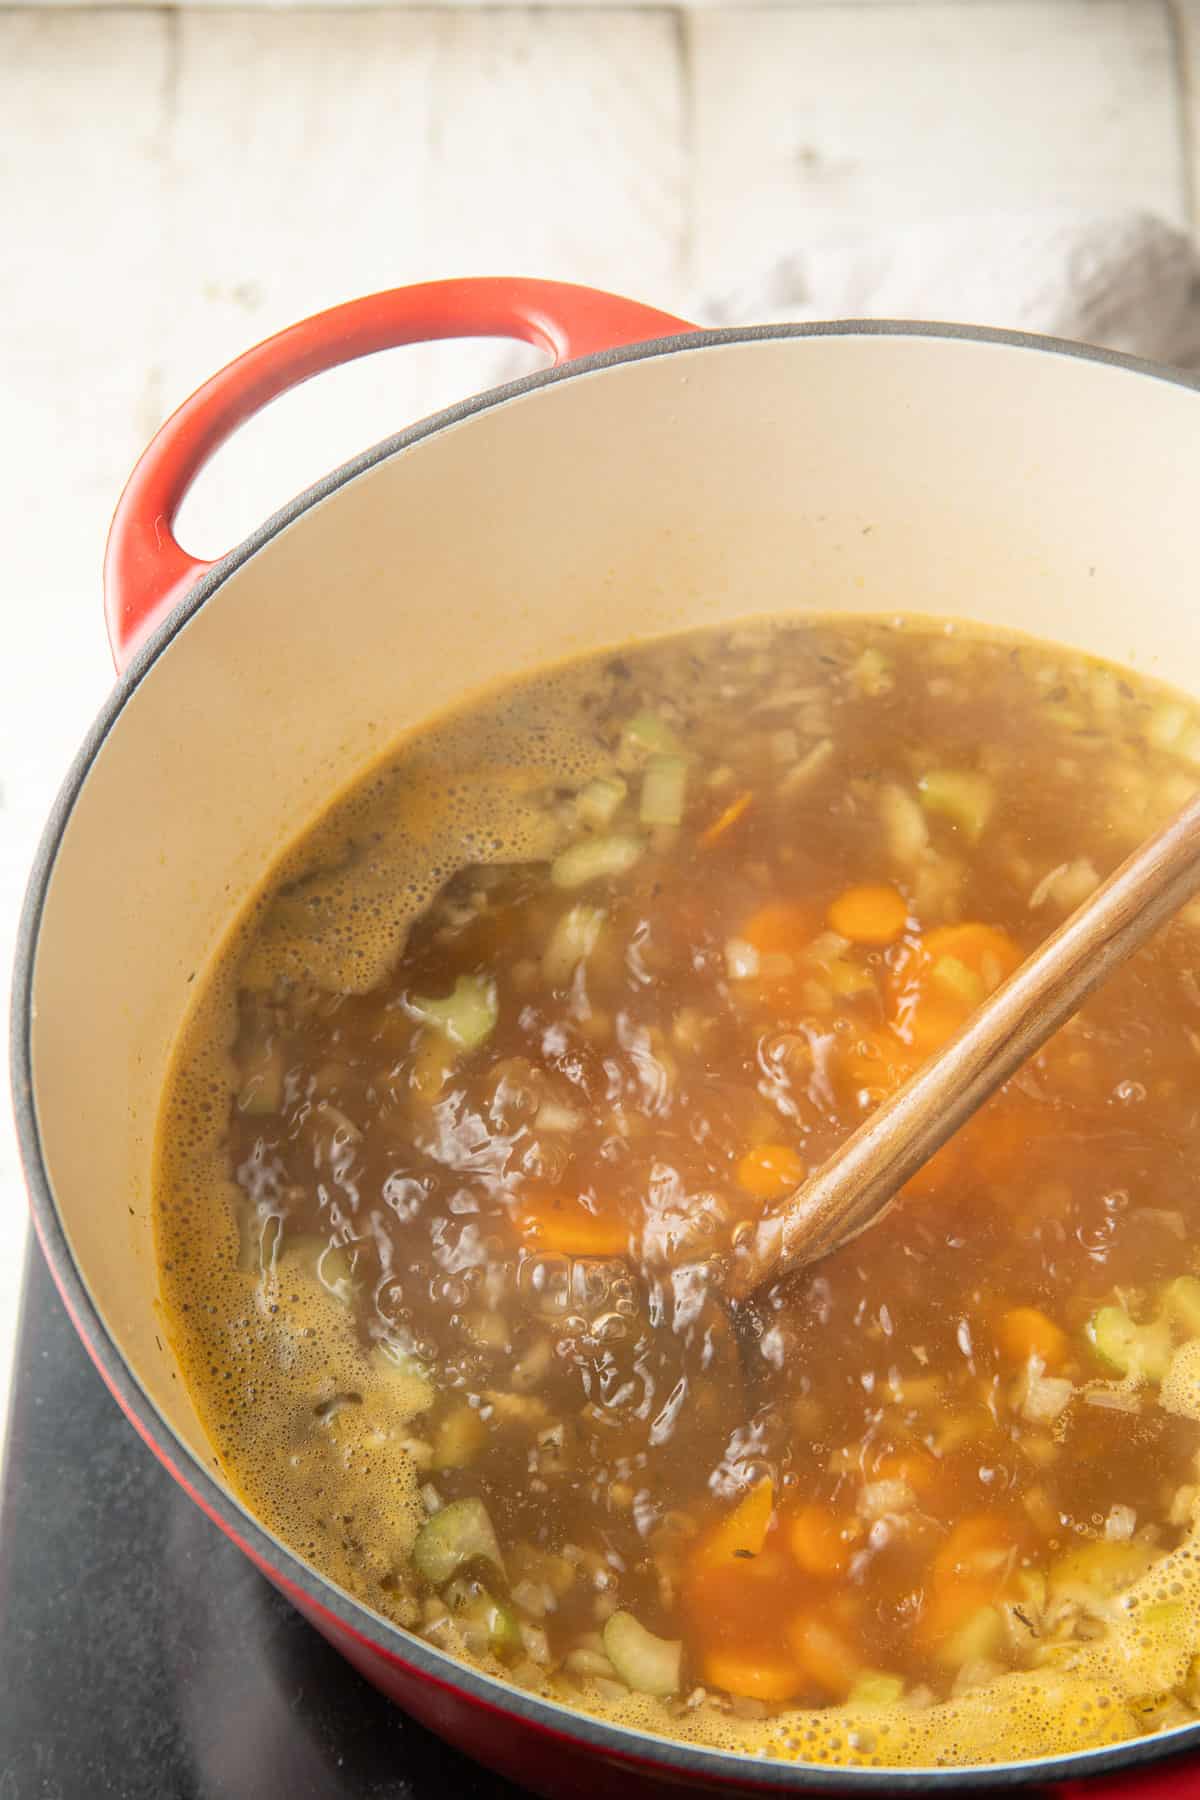 Carrots, onions and celery simmering in vegetable broth.